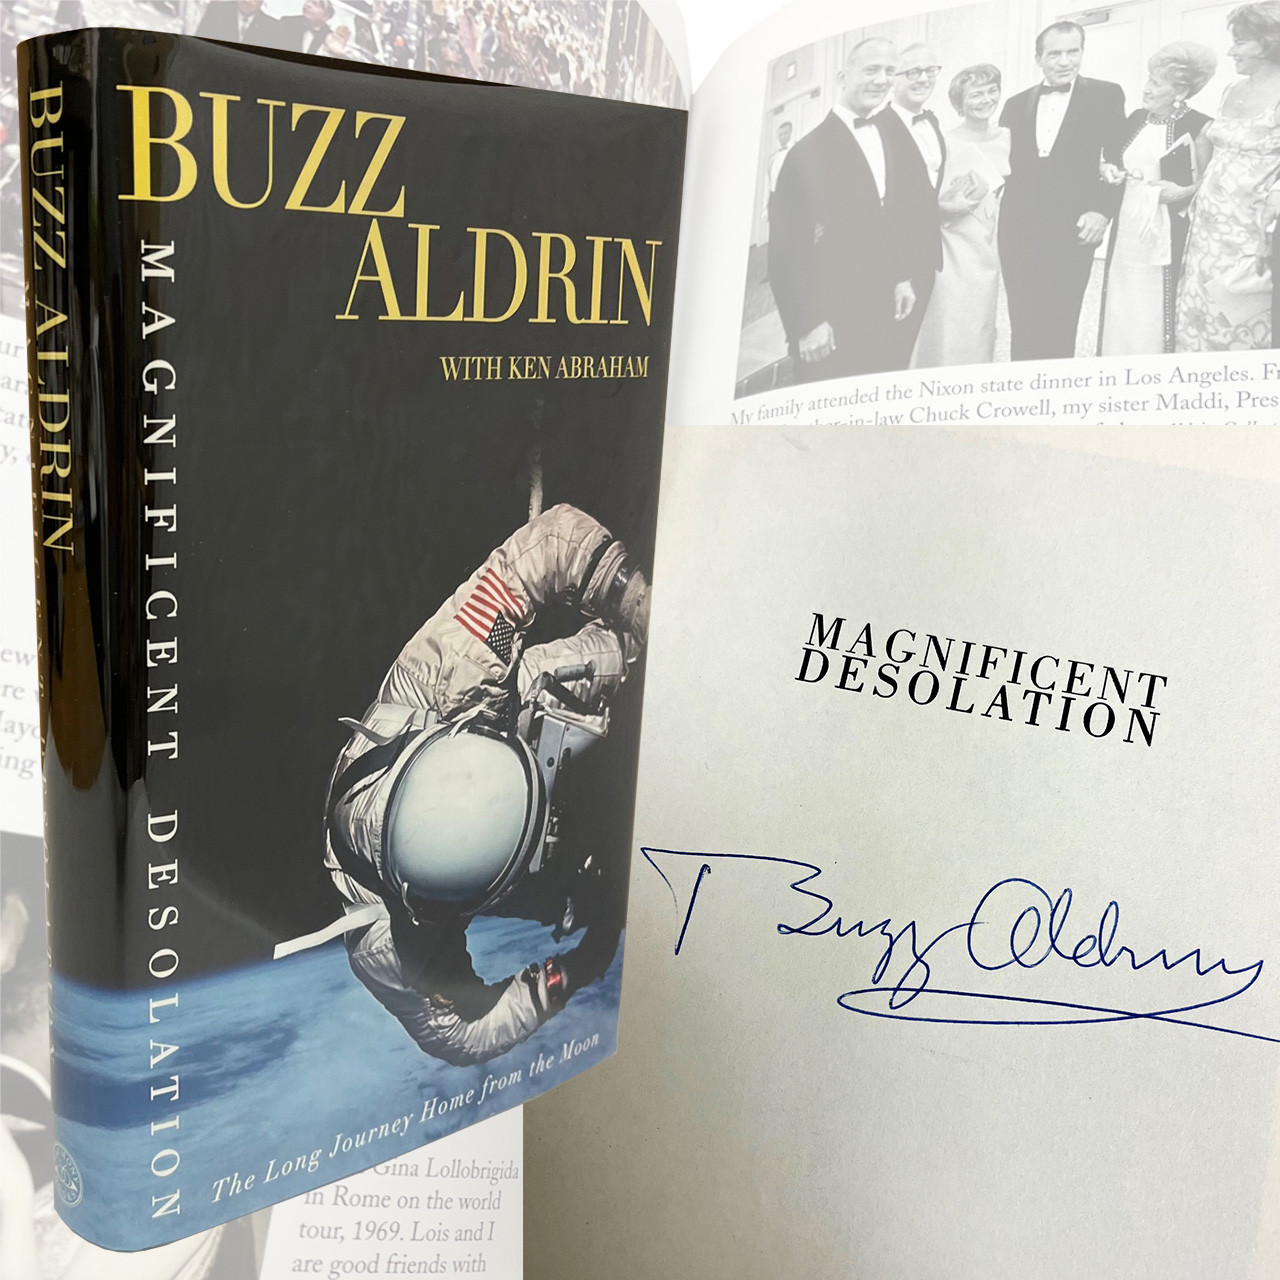 Buzz Aldrin "Magnificent Desolation" Signed First Edition w/COA (Signed by Buzz Aldrin, one of the first men to walk on the  moon)